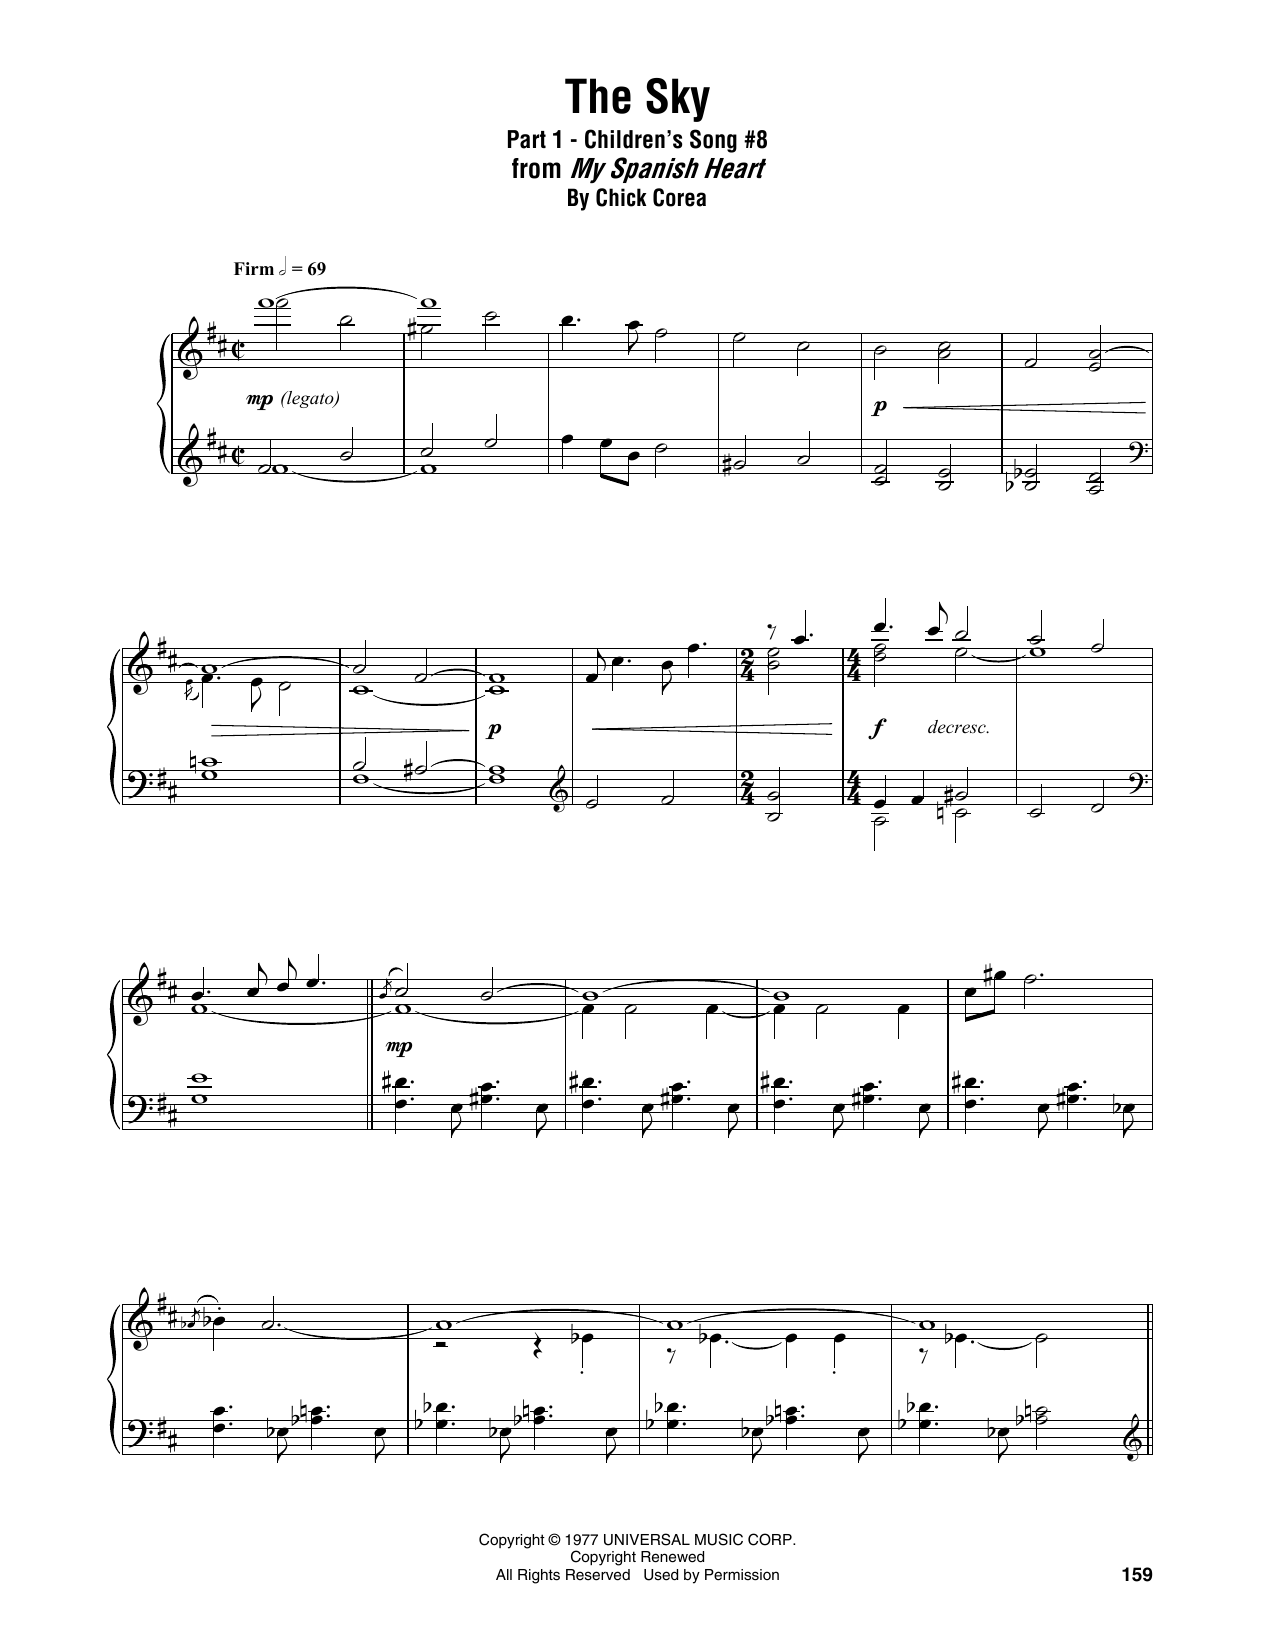 Download Chick Corea The Sky (Part 1 - Children's Song #8) Sheet Music